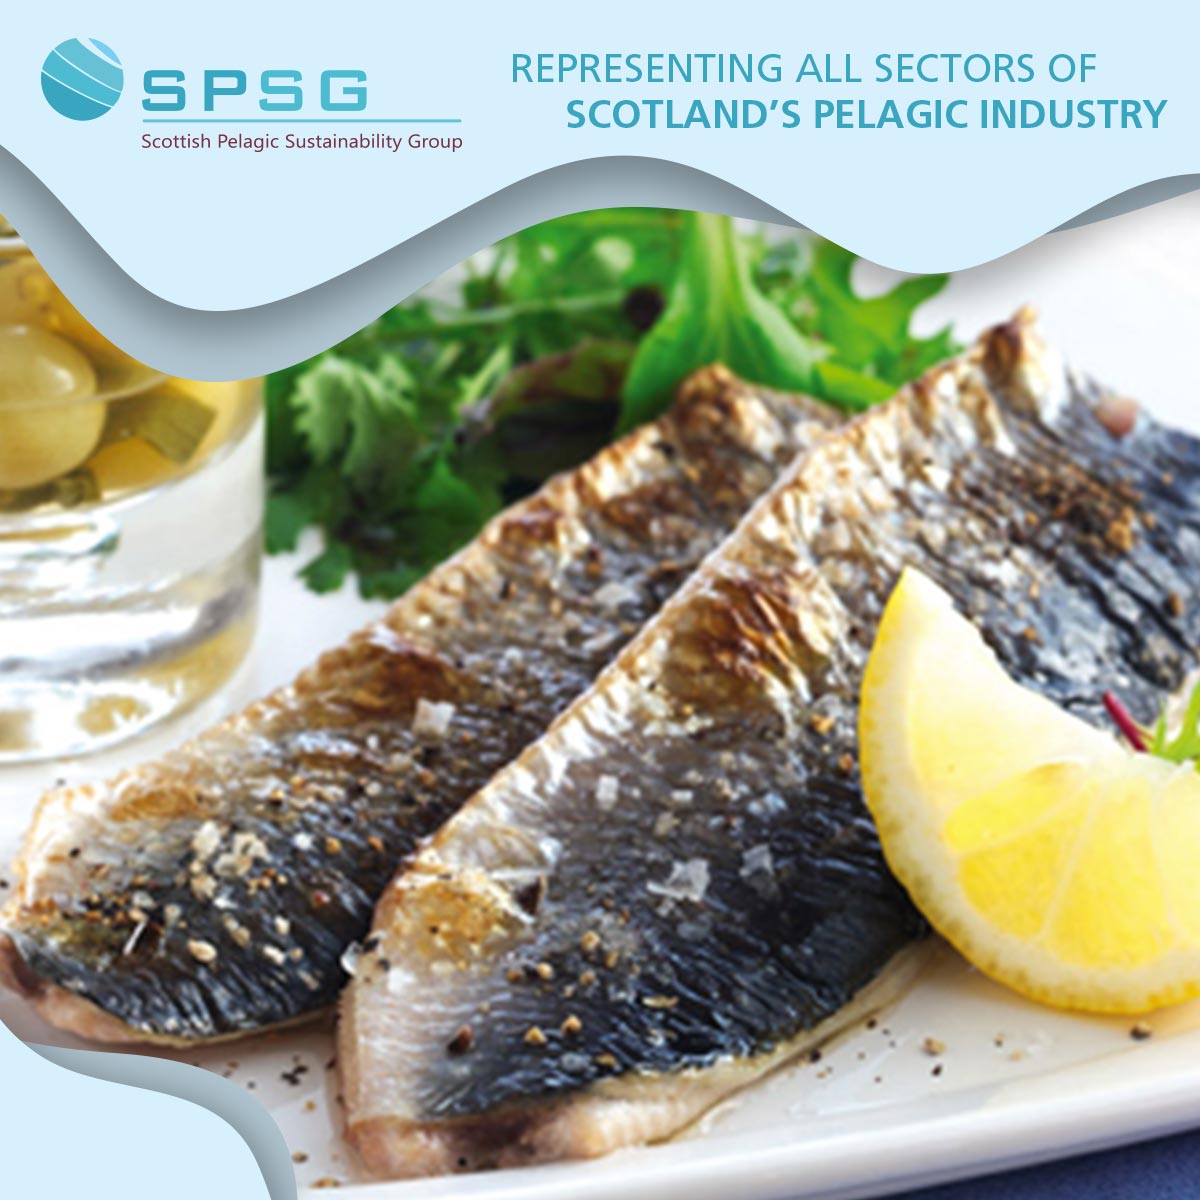 Mackerel and herring are great sources of Vitamin D and health experts recommend that we should be eating two portions of fish a week, one of which should be an oil-rich, such as mackerel or herring. spsg.co.uk #mackerel #herring